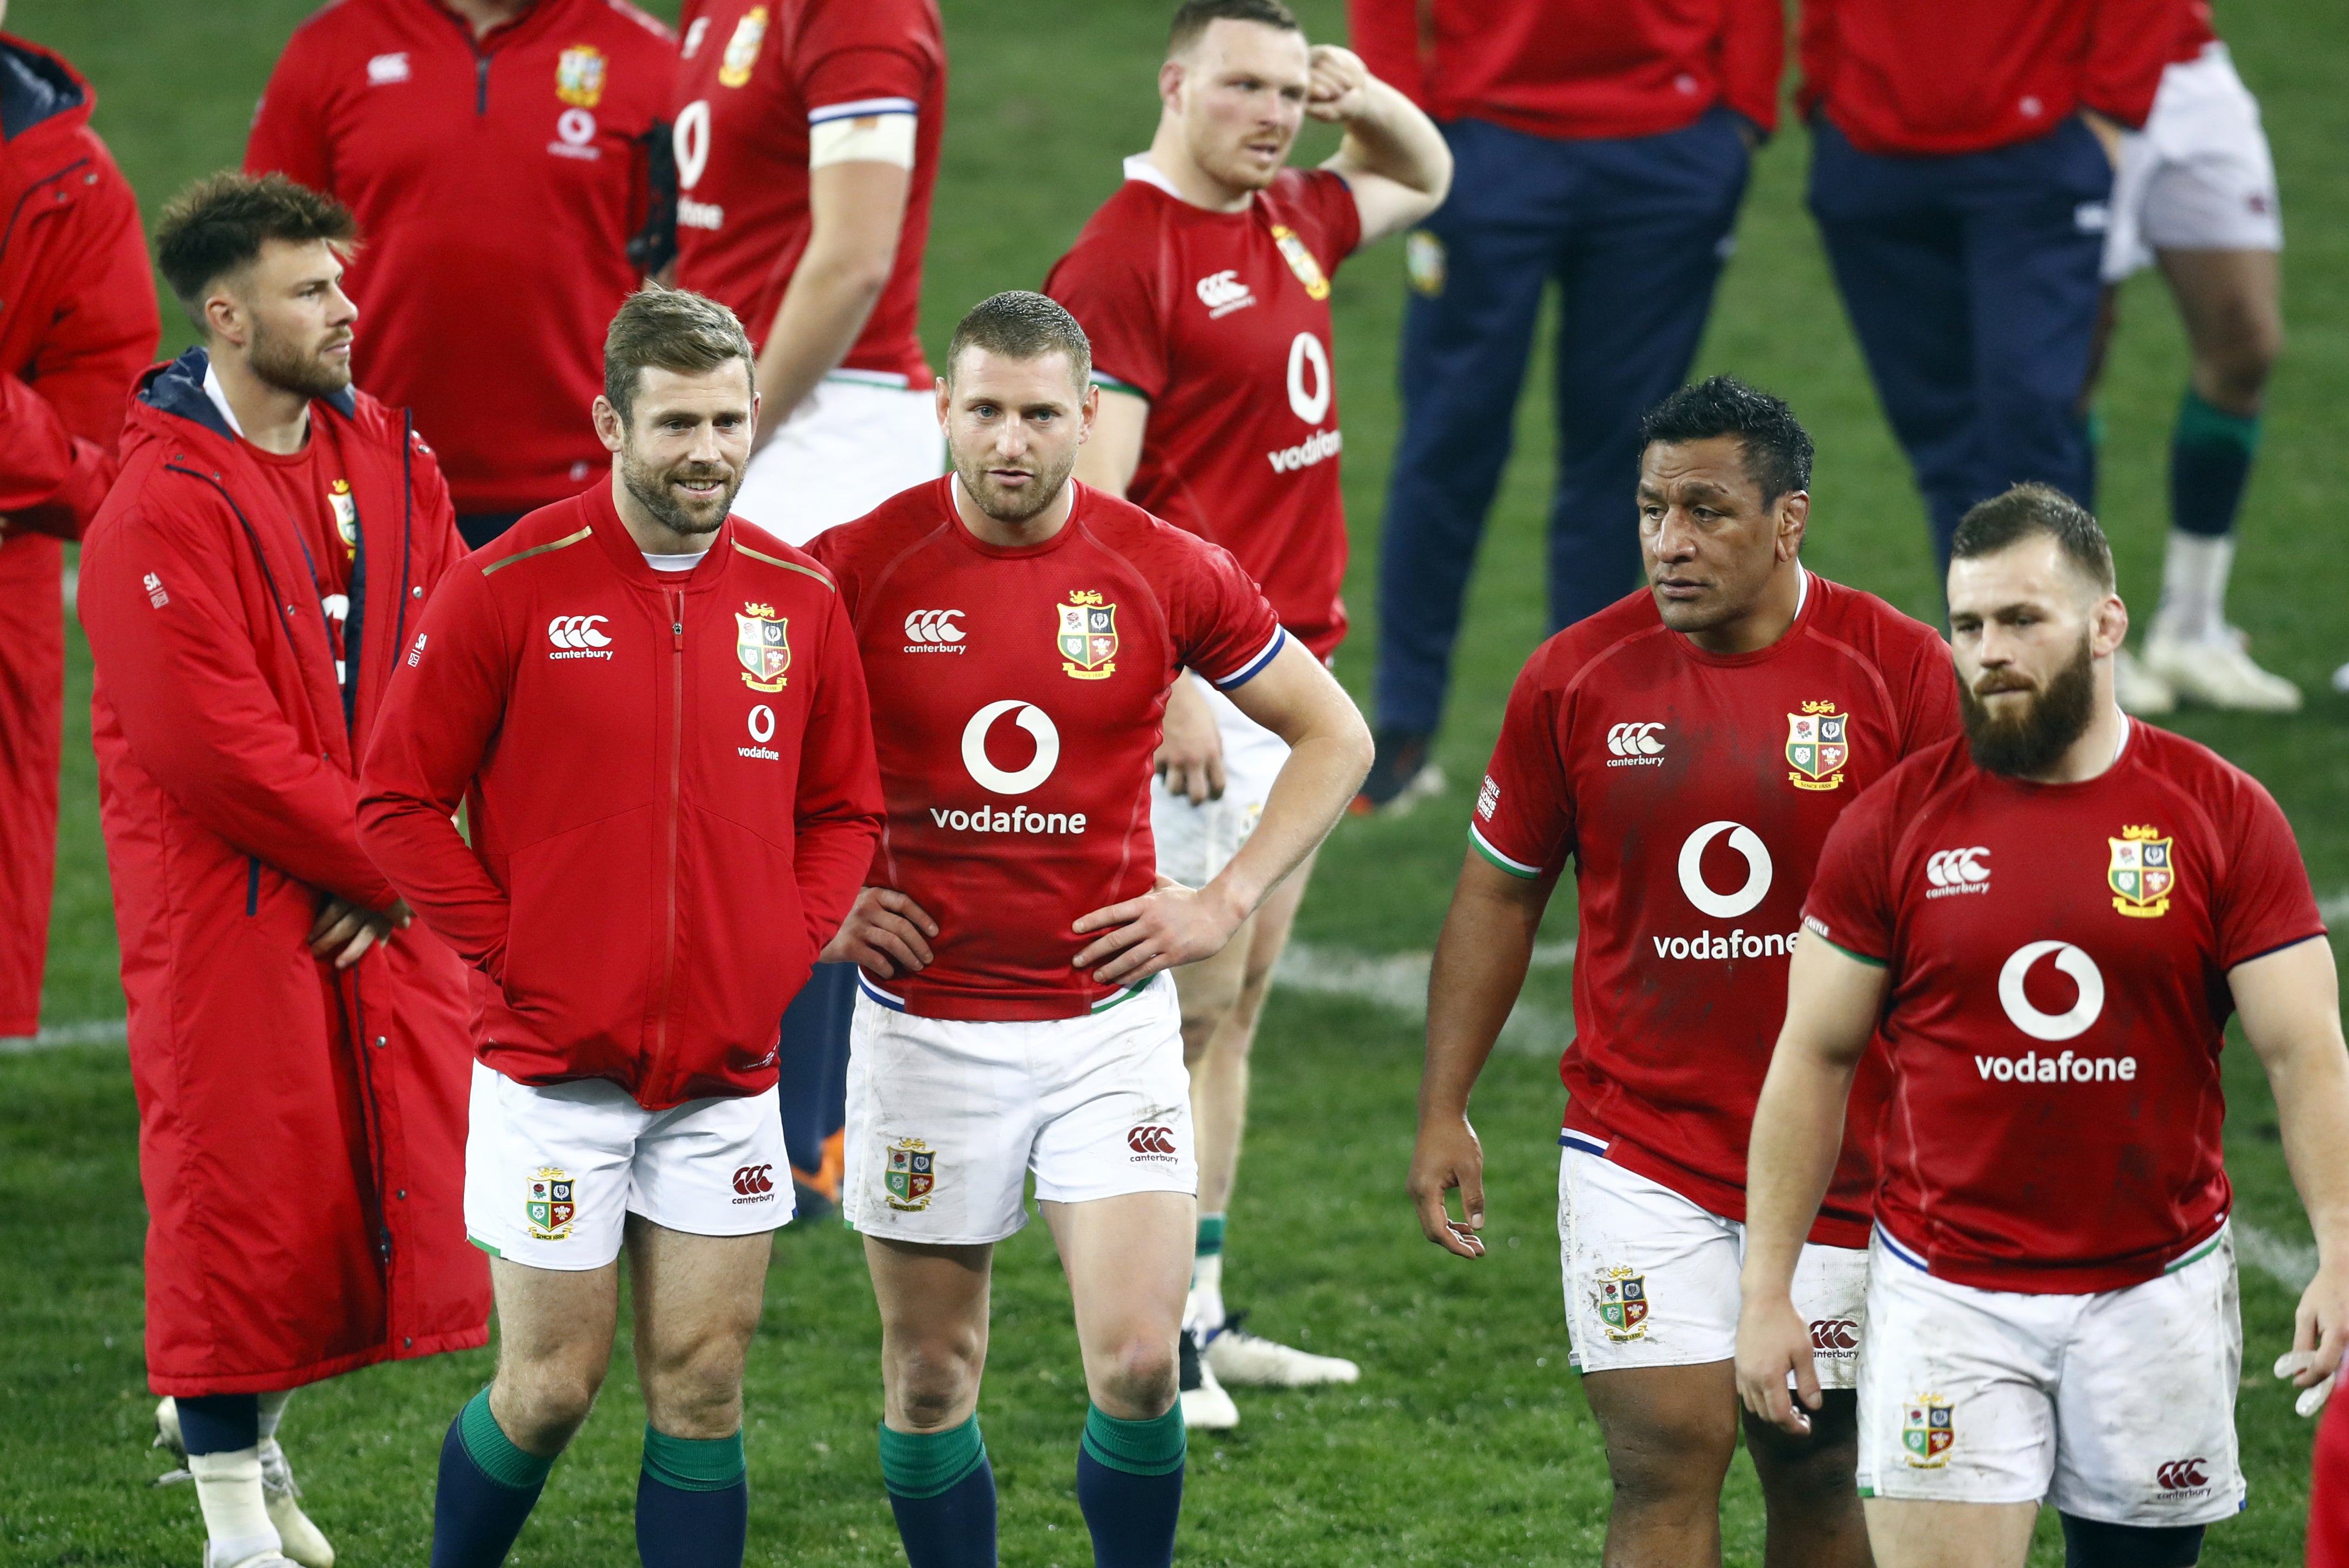 British and Irish Lions players are dejected after losing their summer series 2-1 to South Africa (Steve Haag/PA)